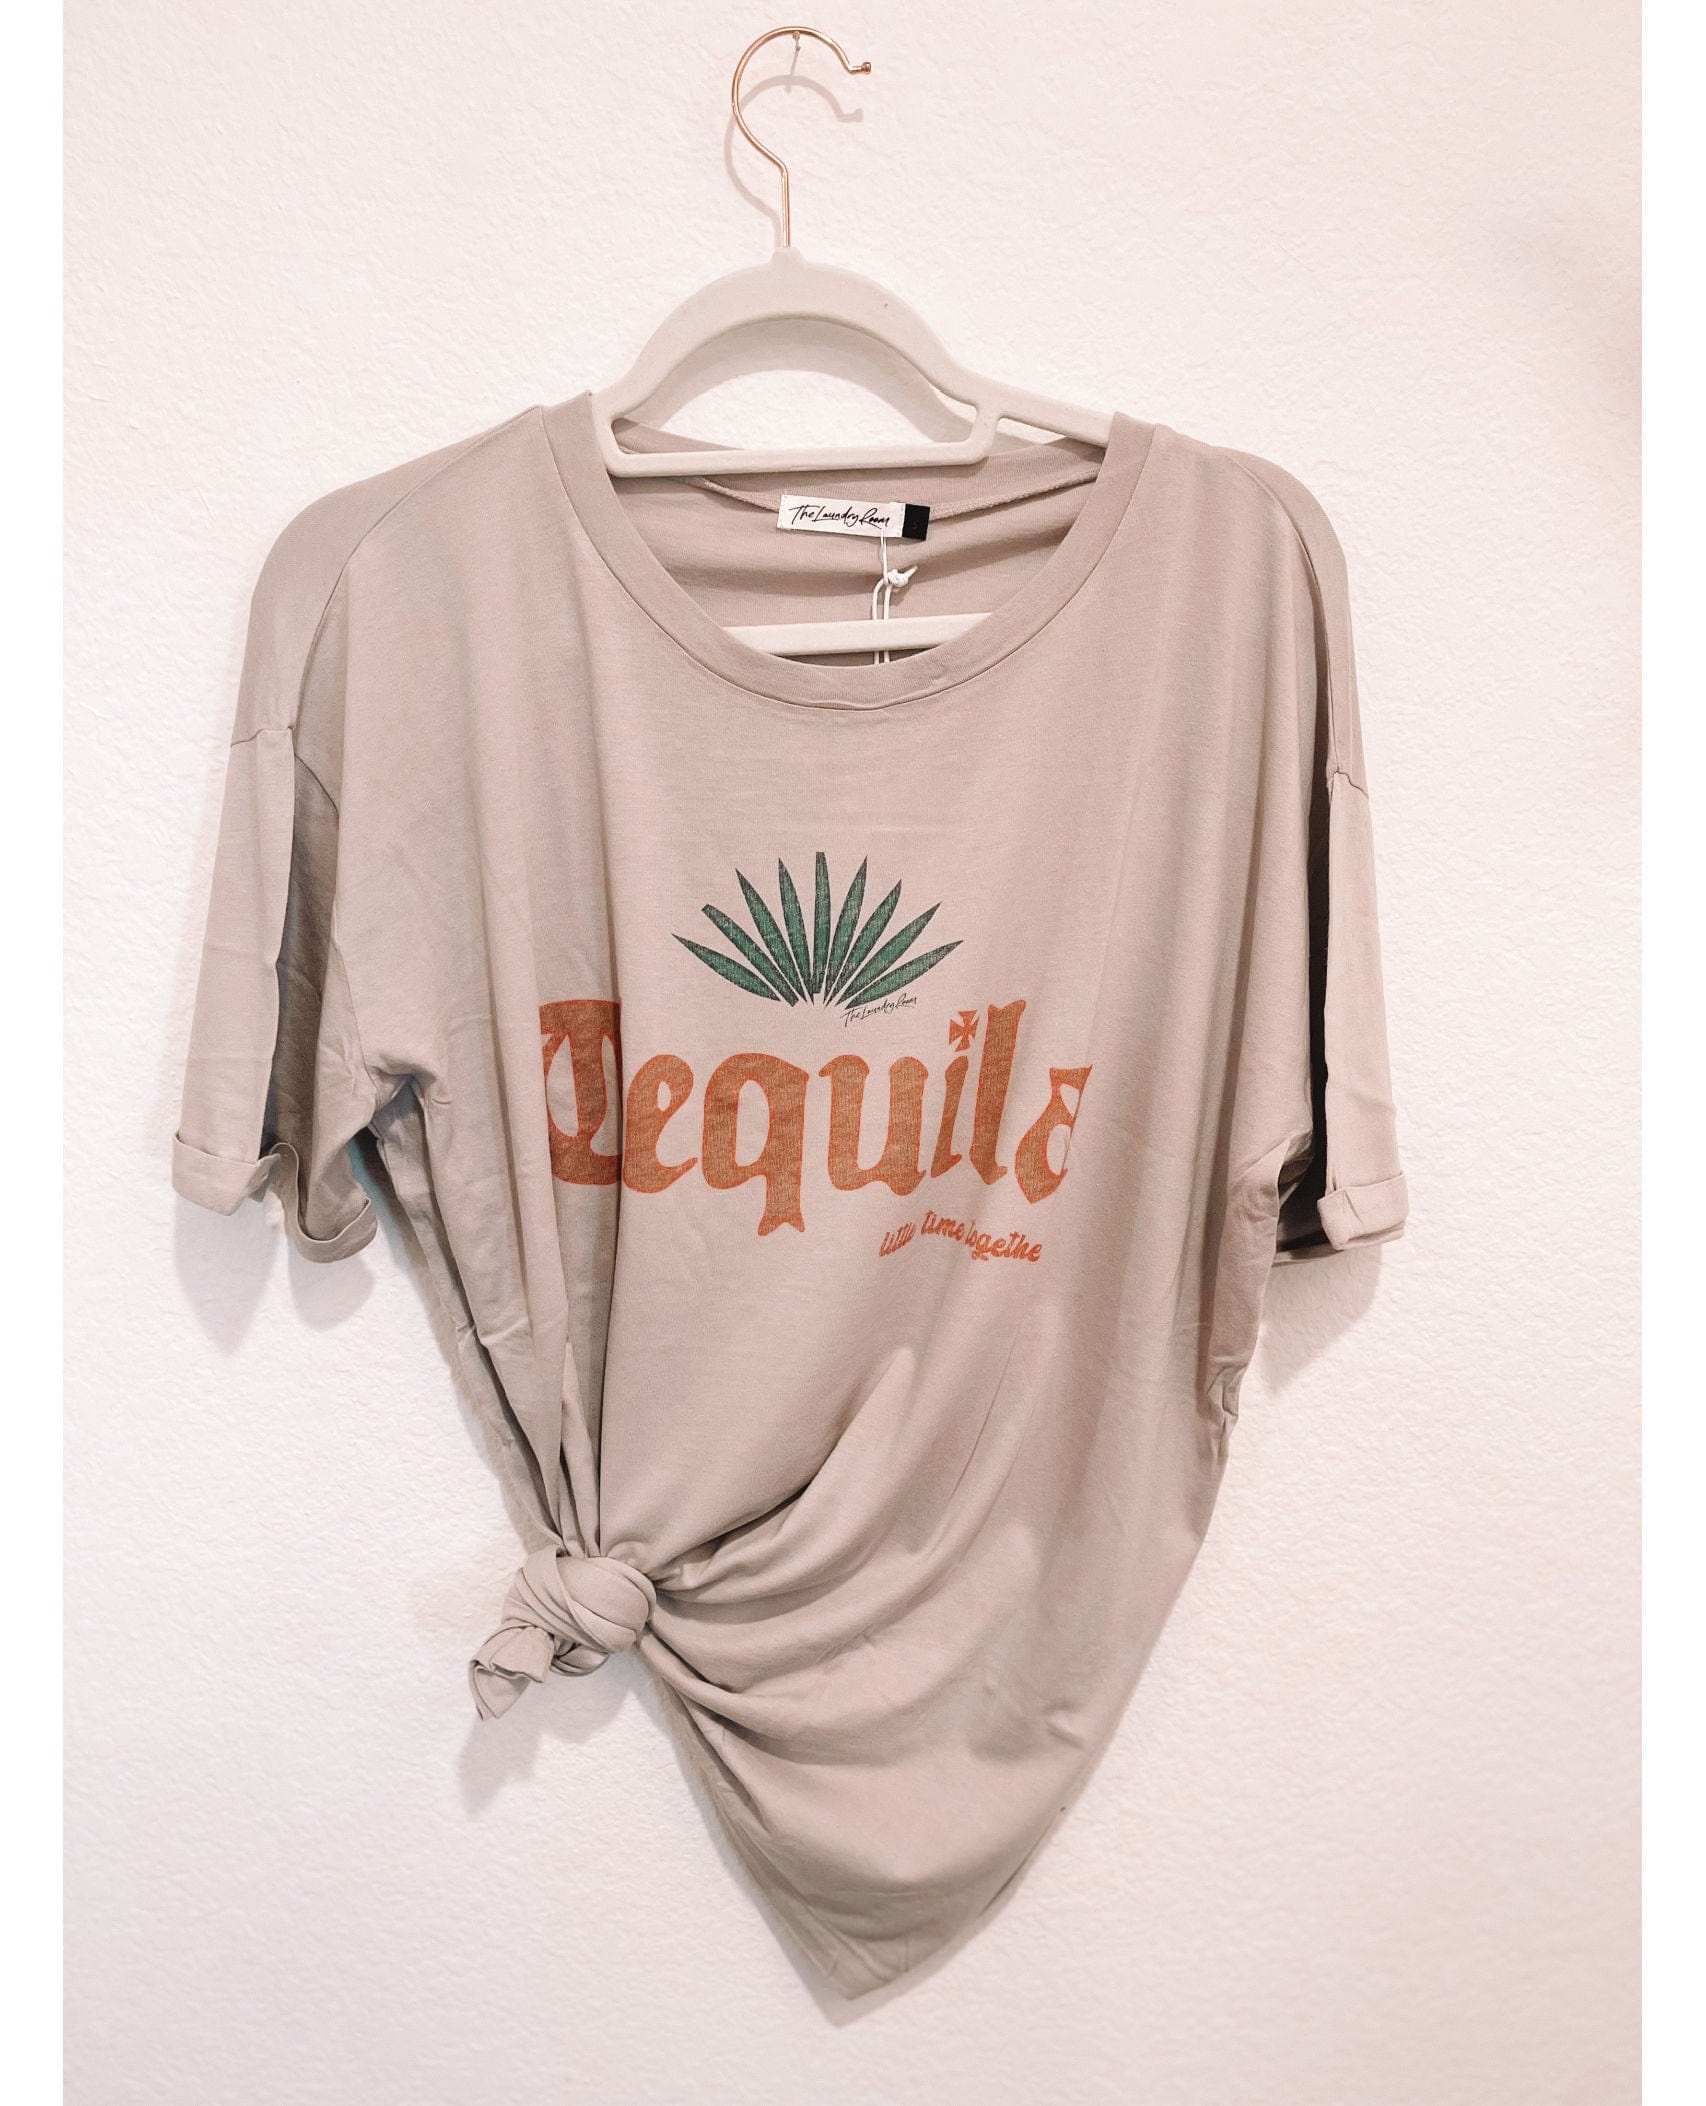 Tequila Oversized T-Shirt